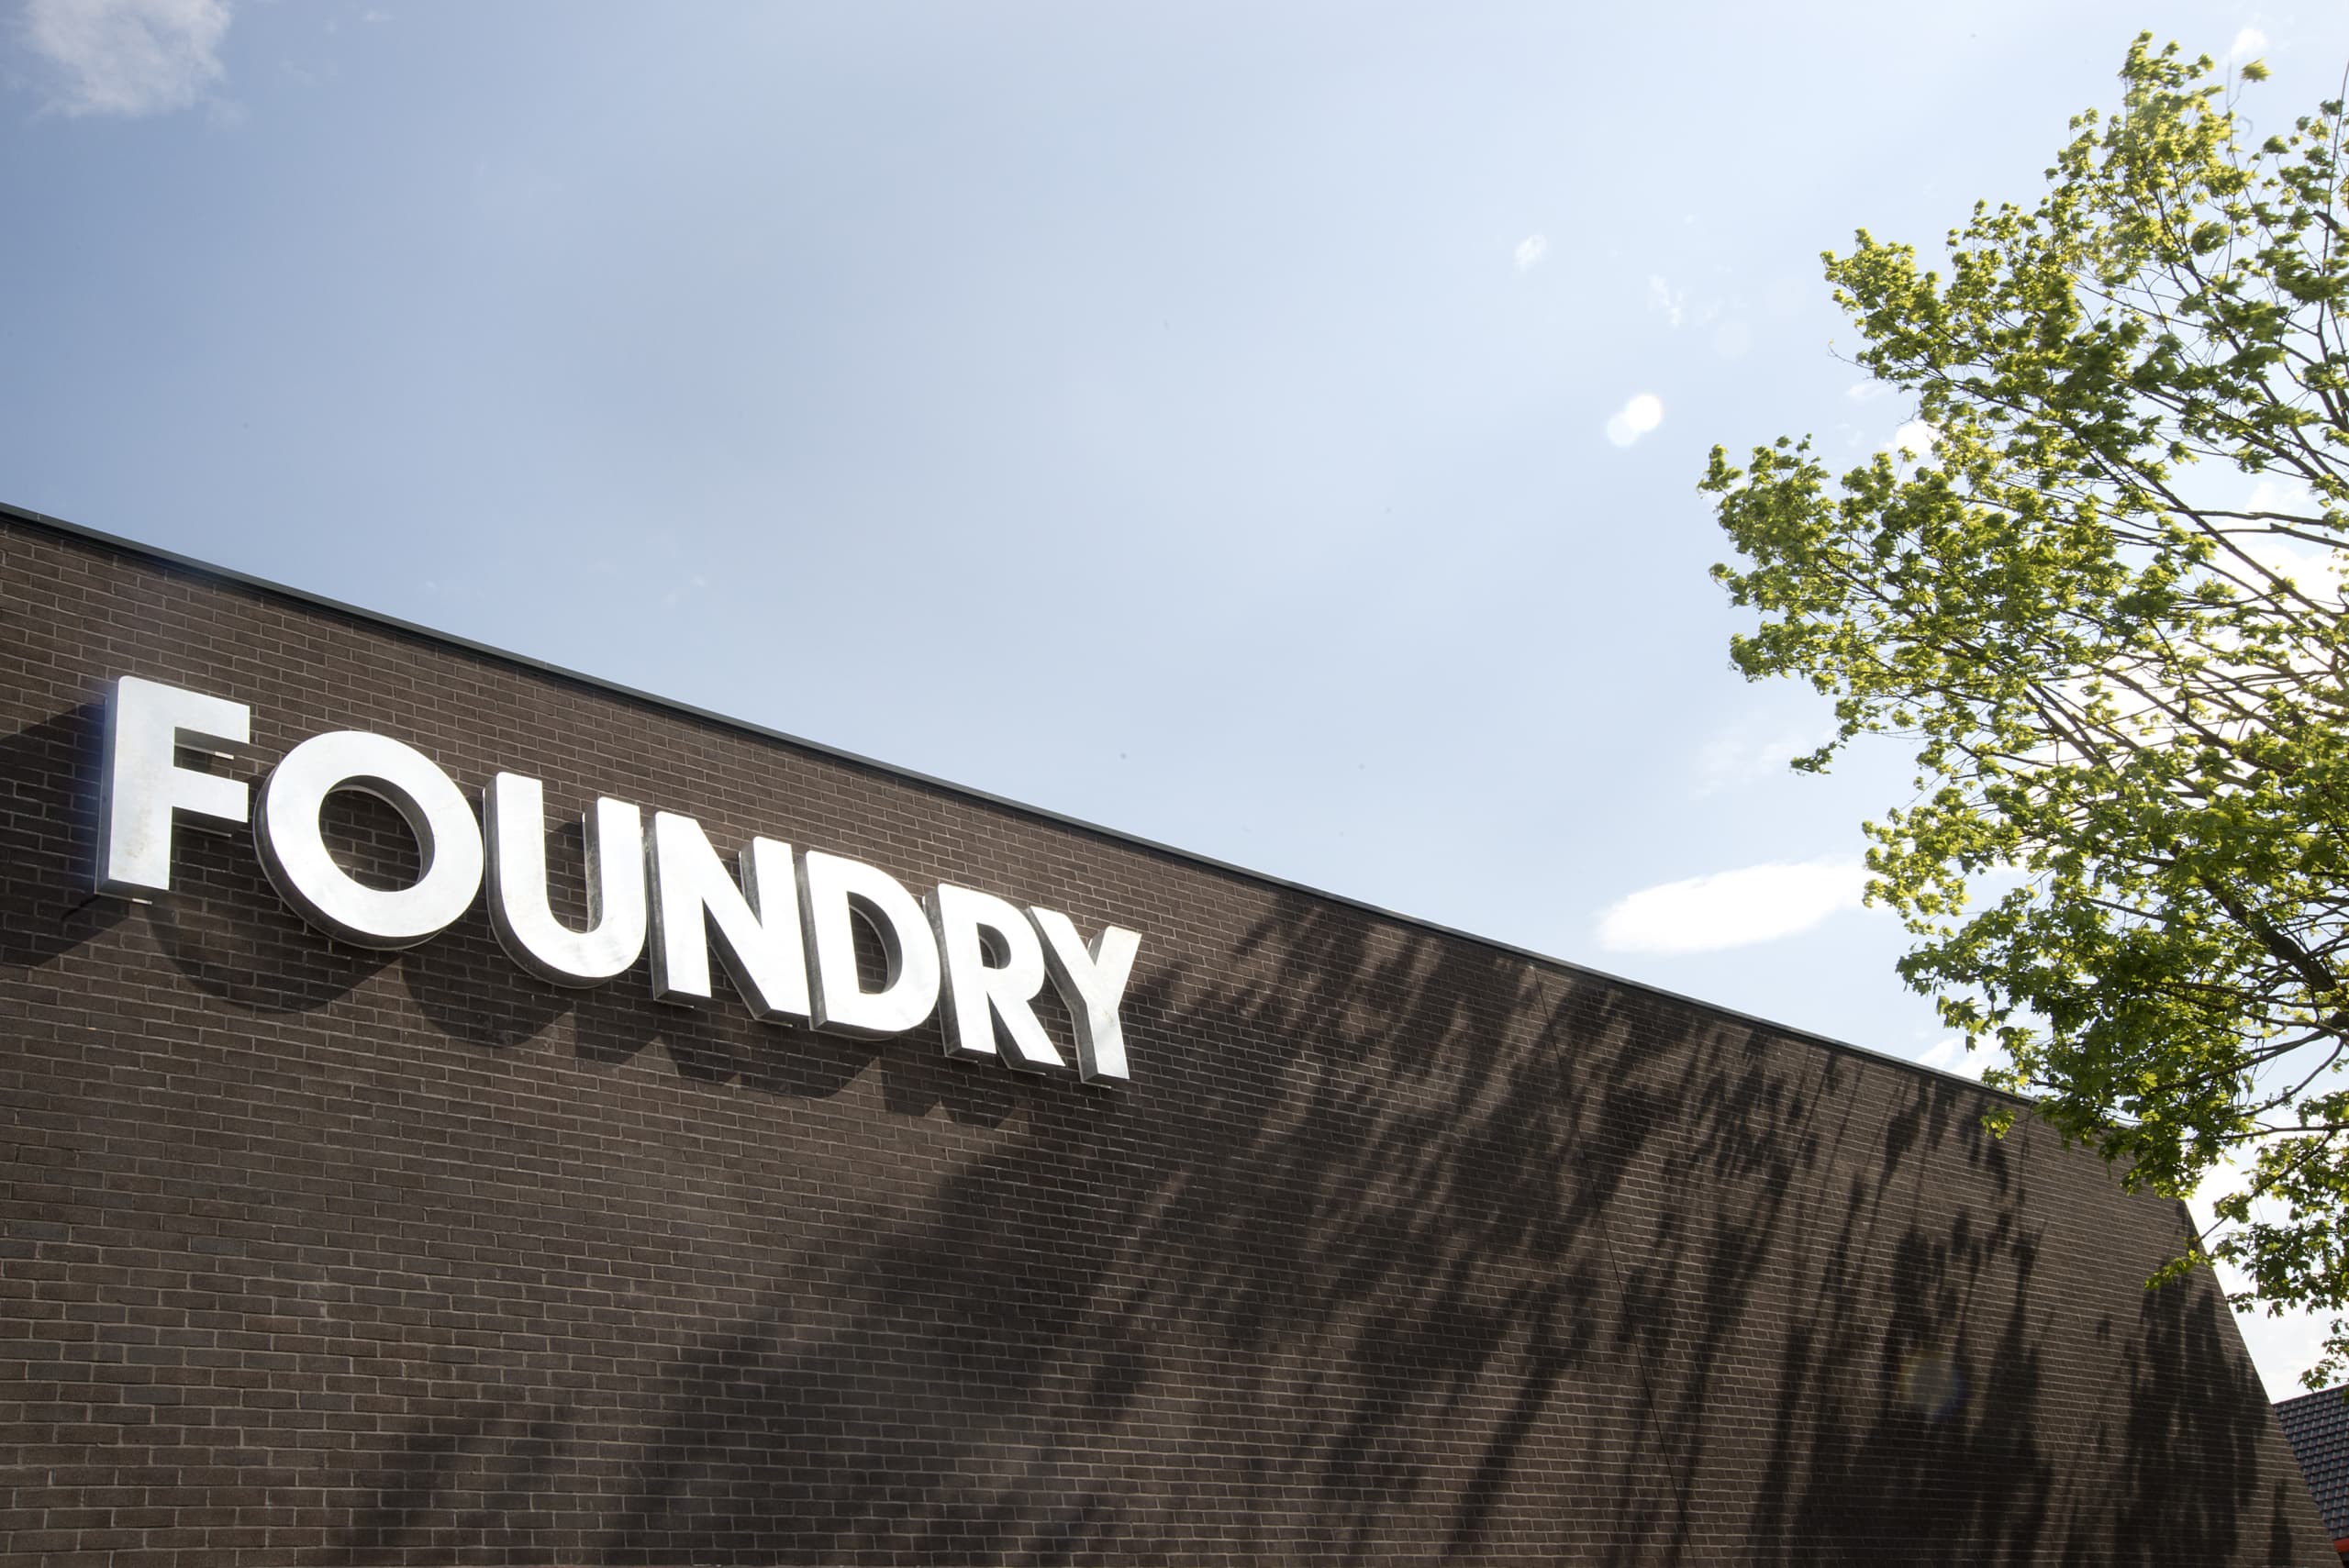 The Foundry, Salford